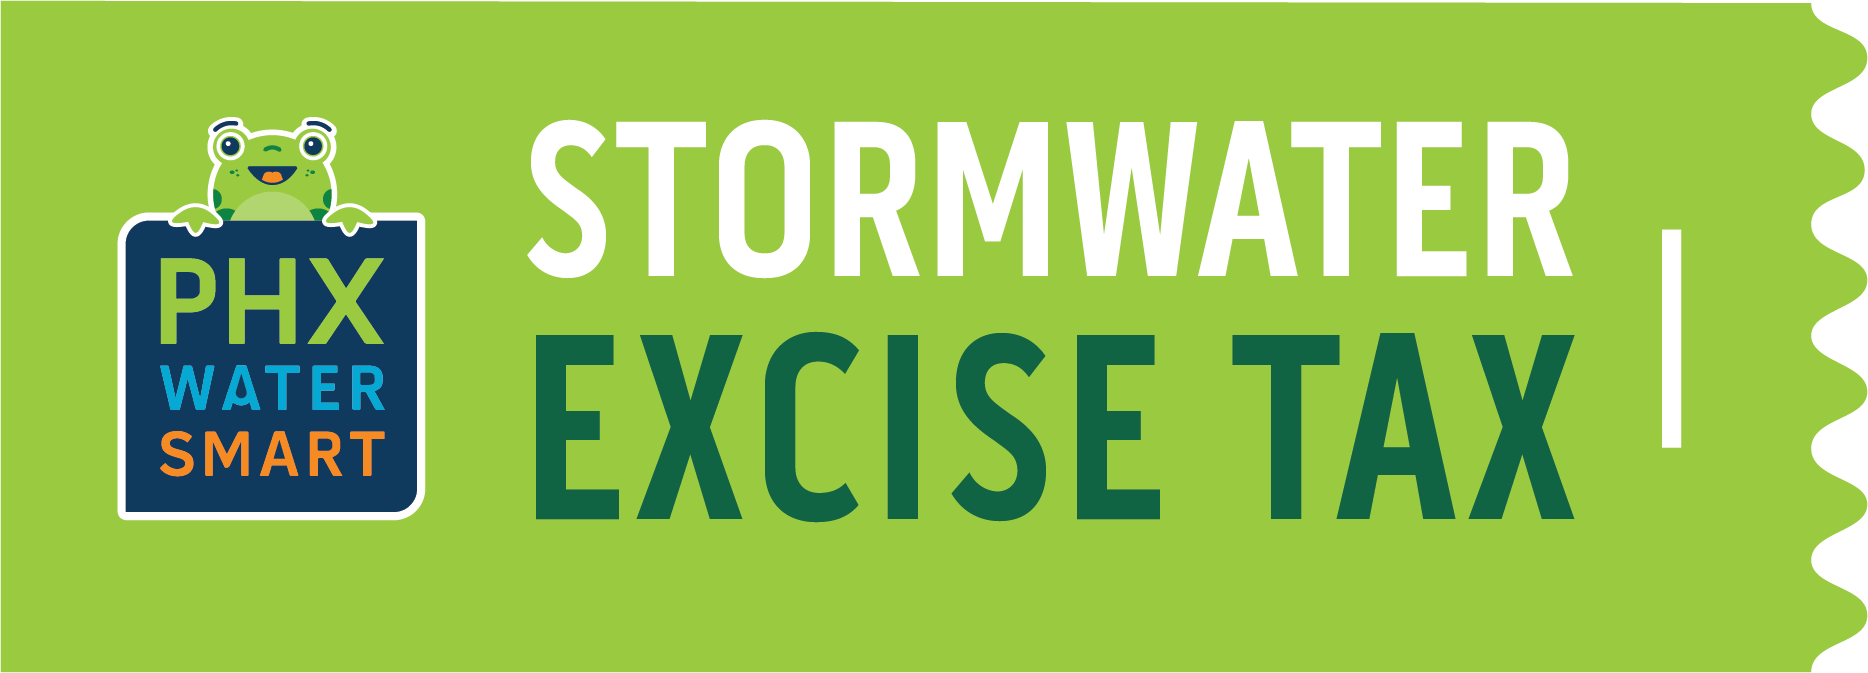 Stormwater Excise Tax graphic 